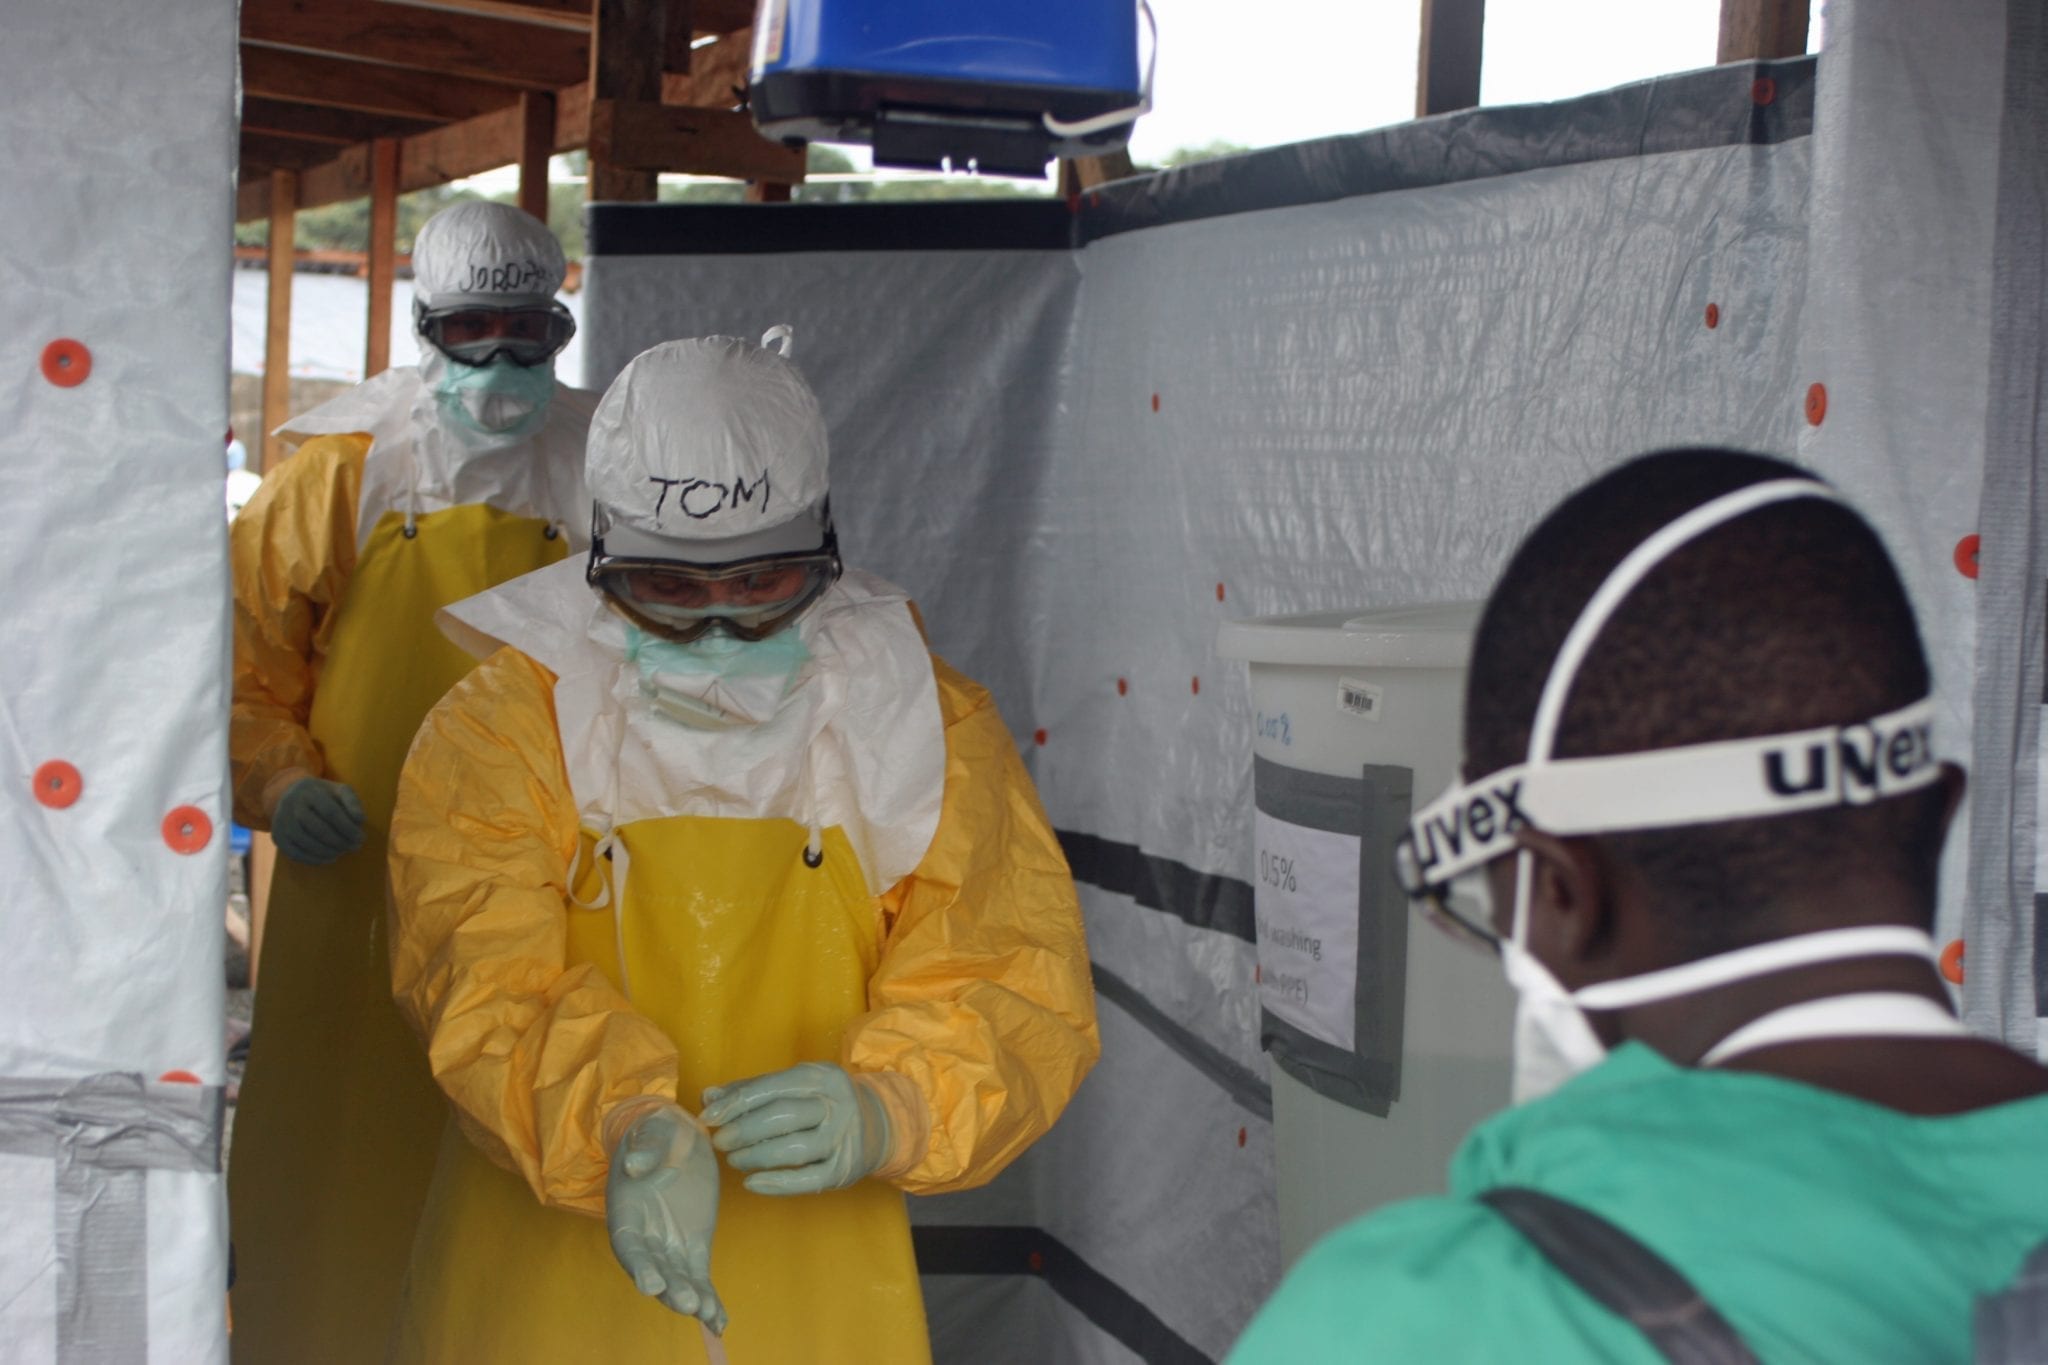 CDC Director exits Ebola treatment unit; image by CDC Global, CC BY 2.0, via Wikimedia Commons, no changes.